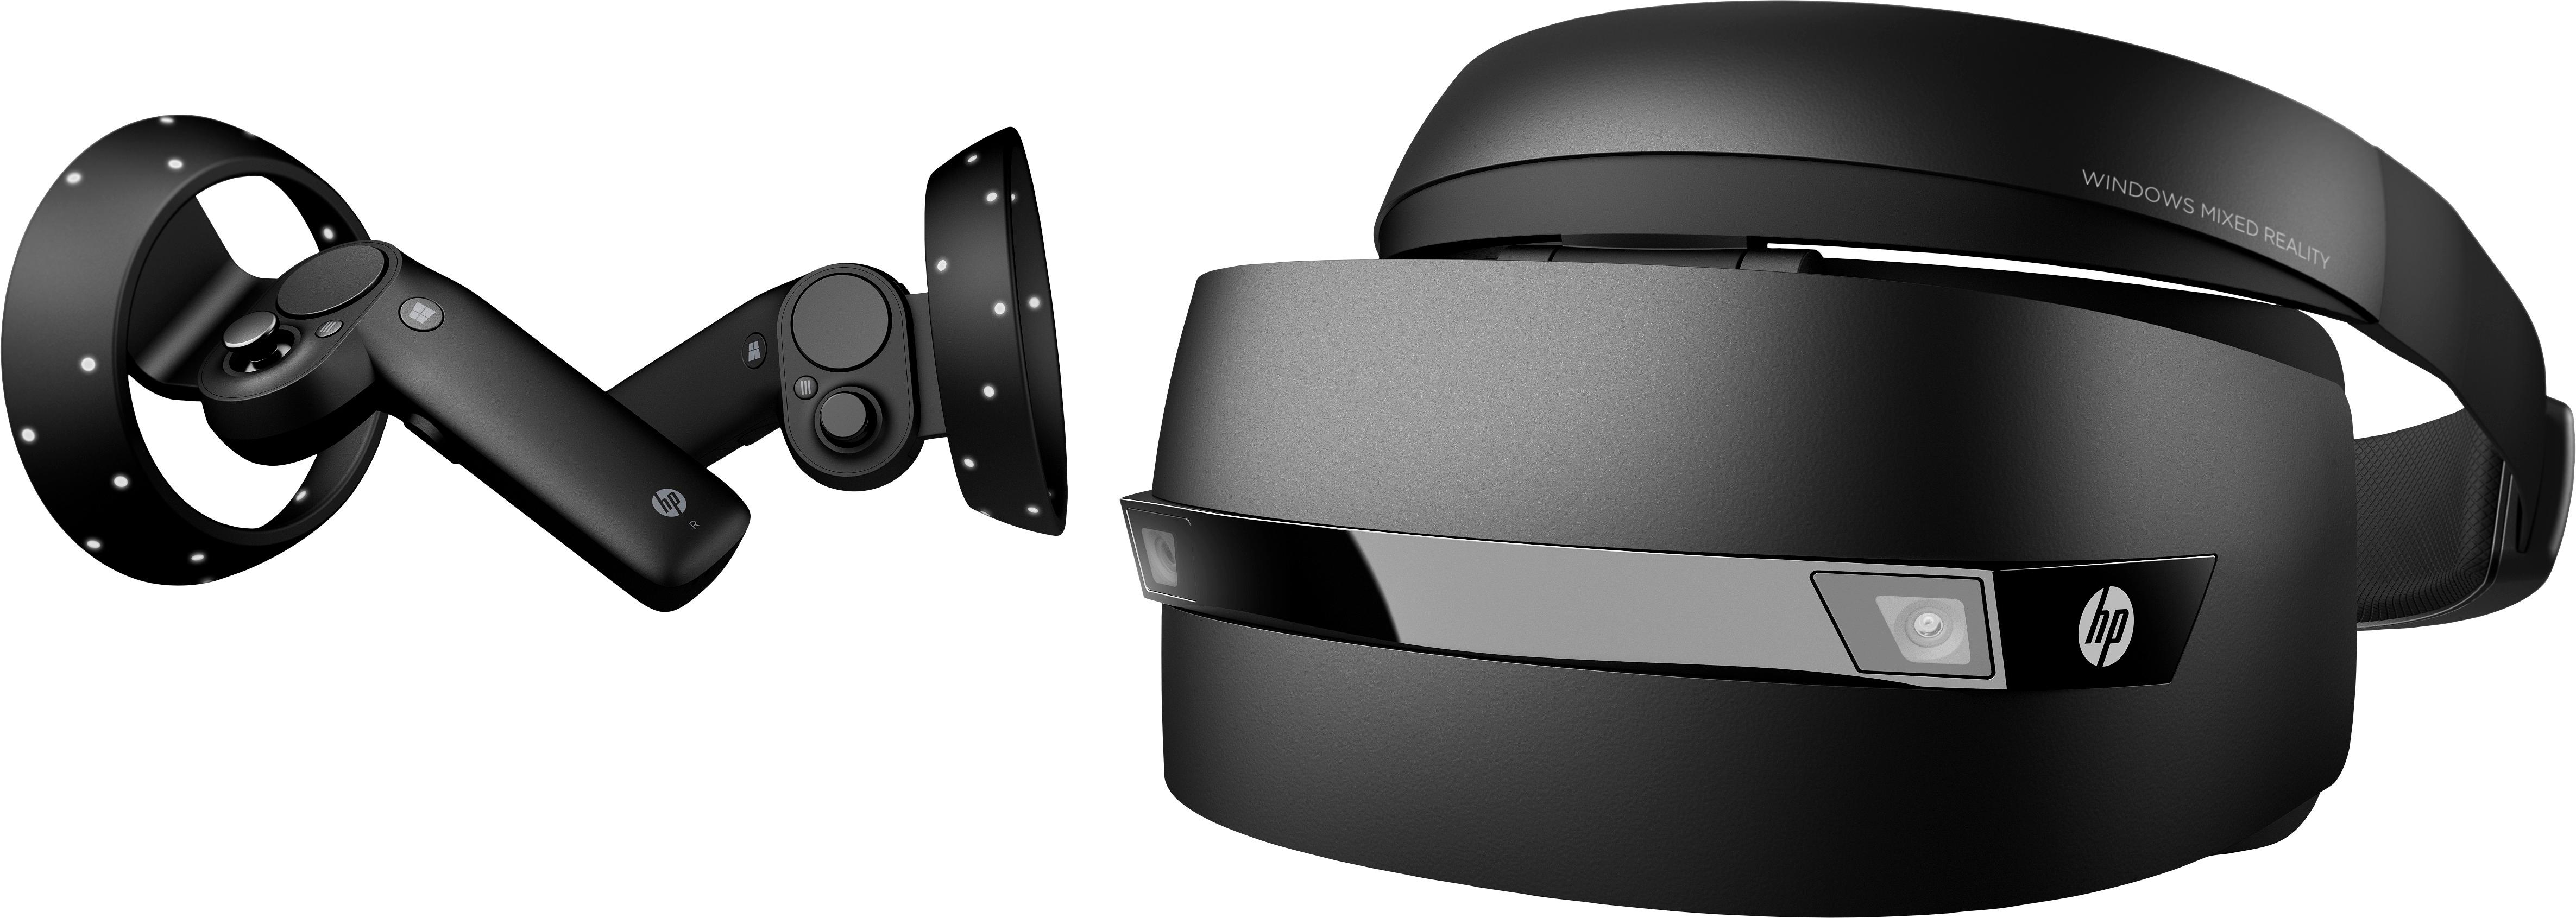 vr headset with controllers for pc